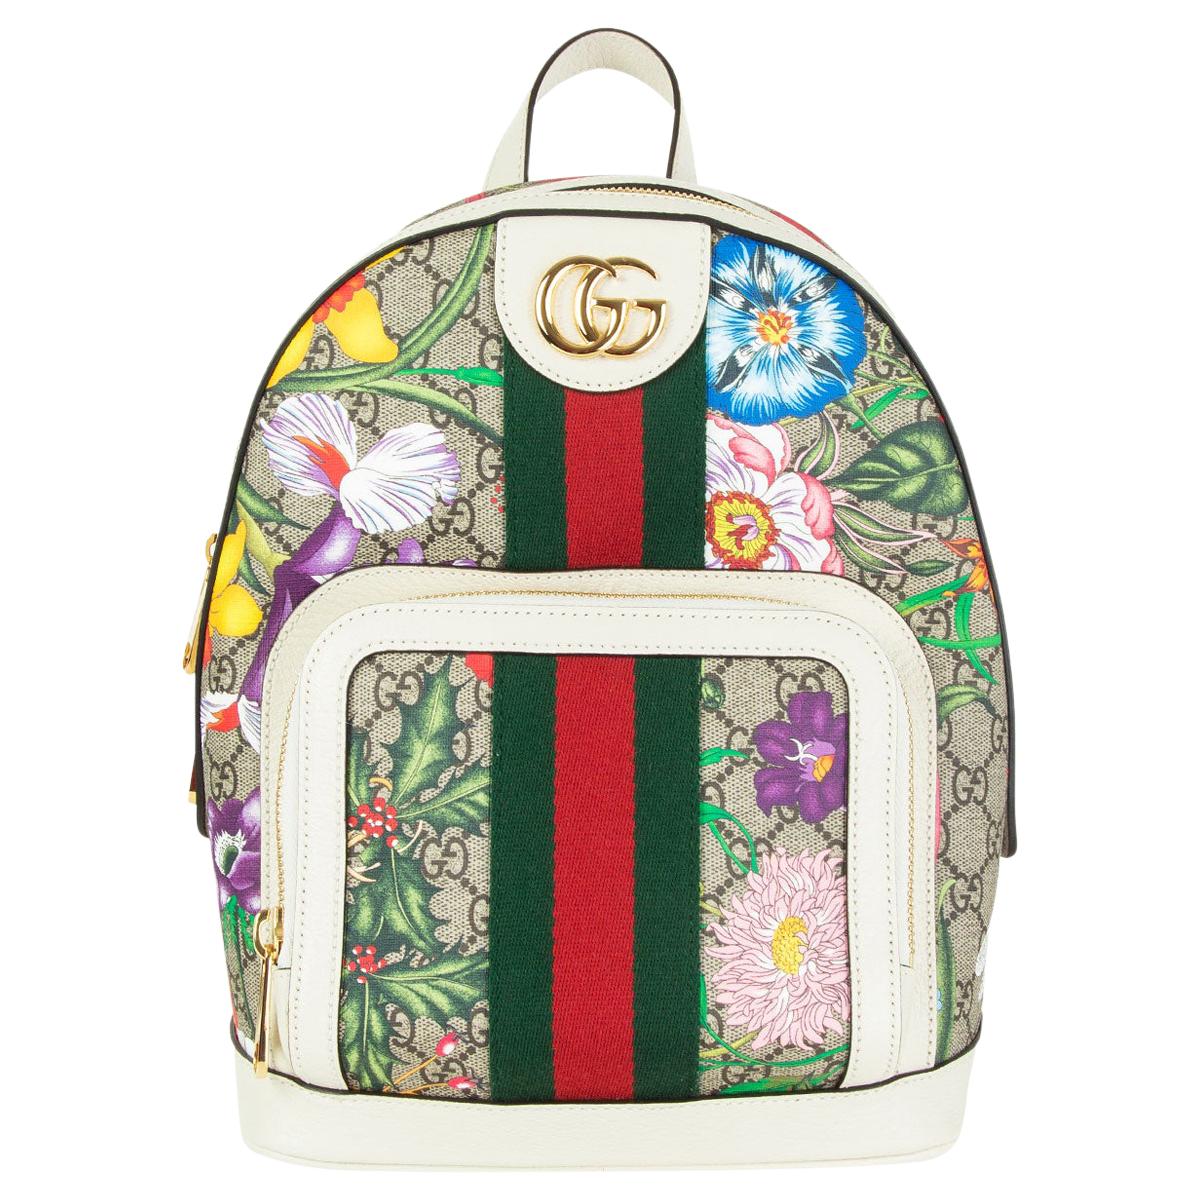 GUCCI white leather OPHIDIA GG FLORAL SMALL Backpack Bag